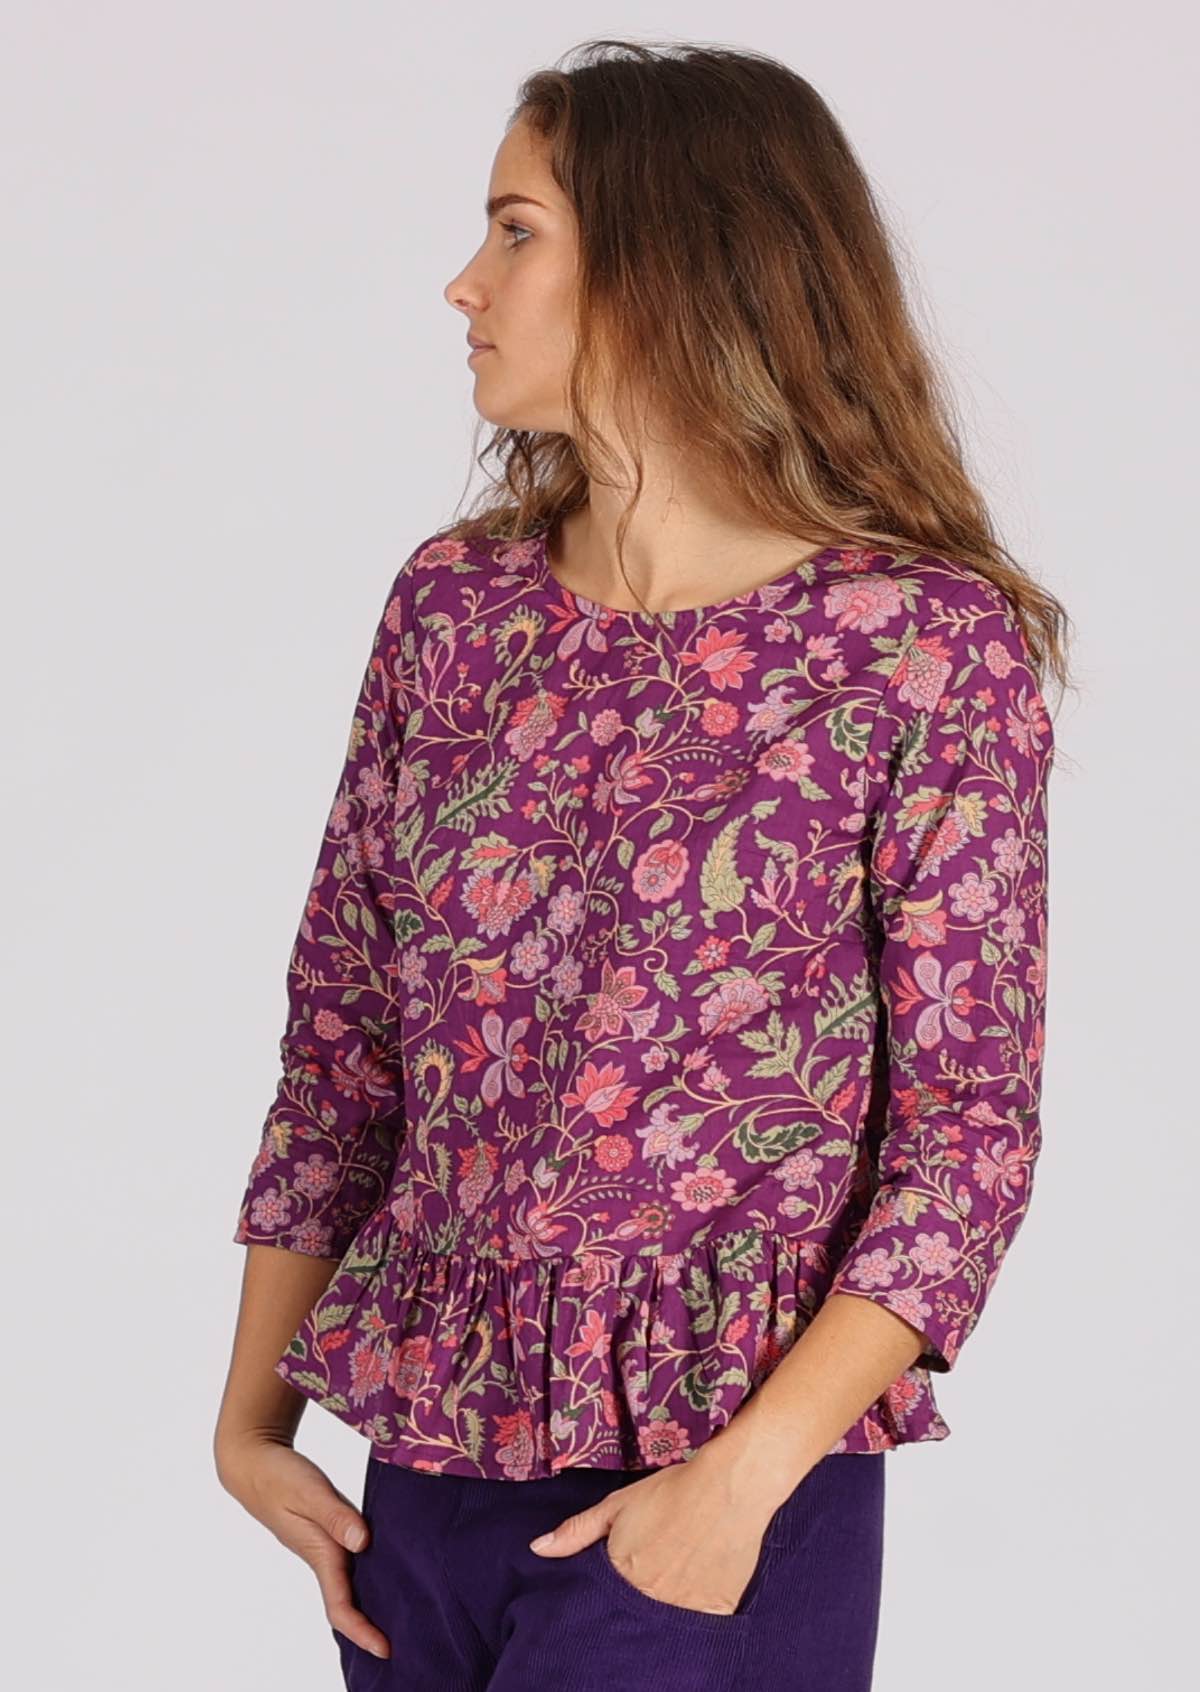 Round neckline, 3/4 sleeves, relaxed fit, peplum flair, cotton top